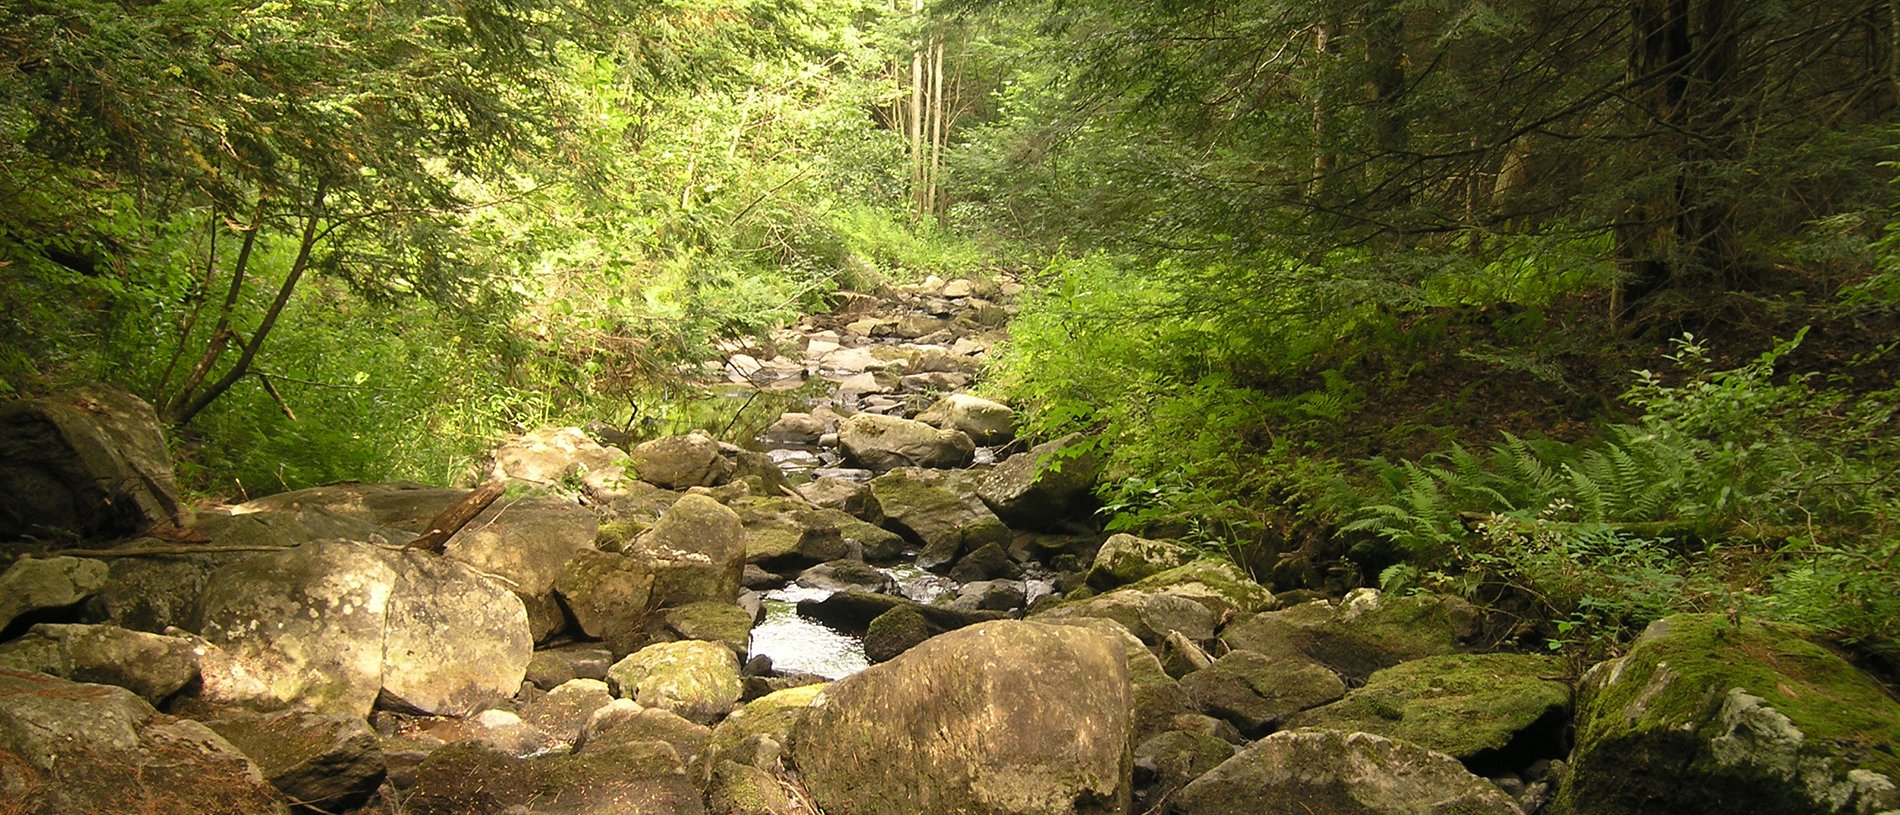 Rocky stream in a forest